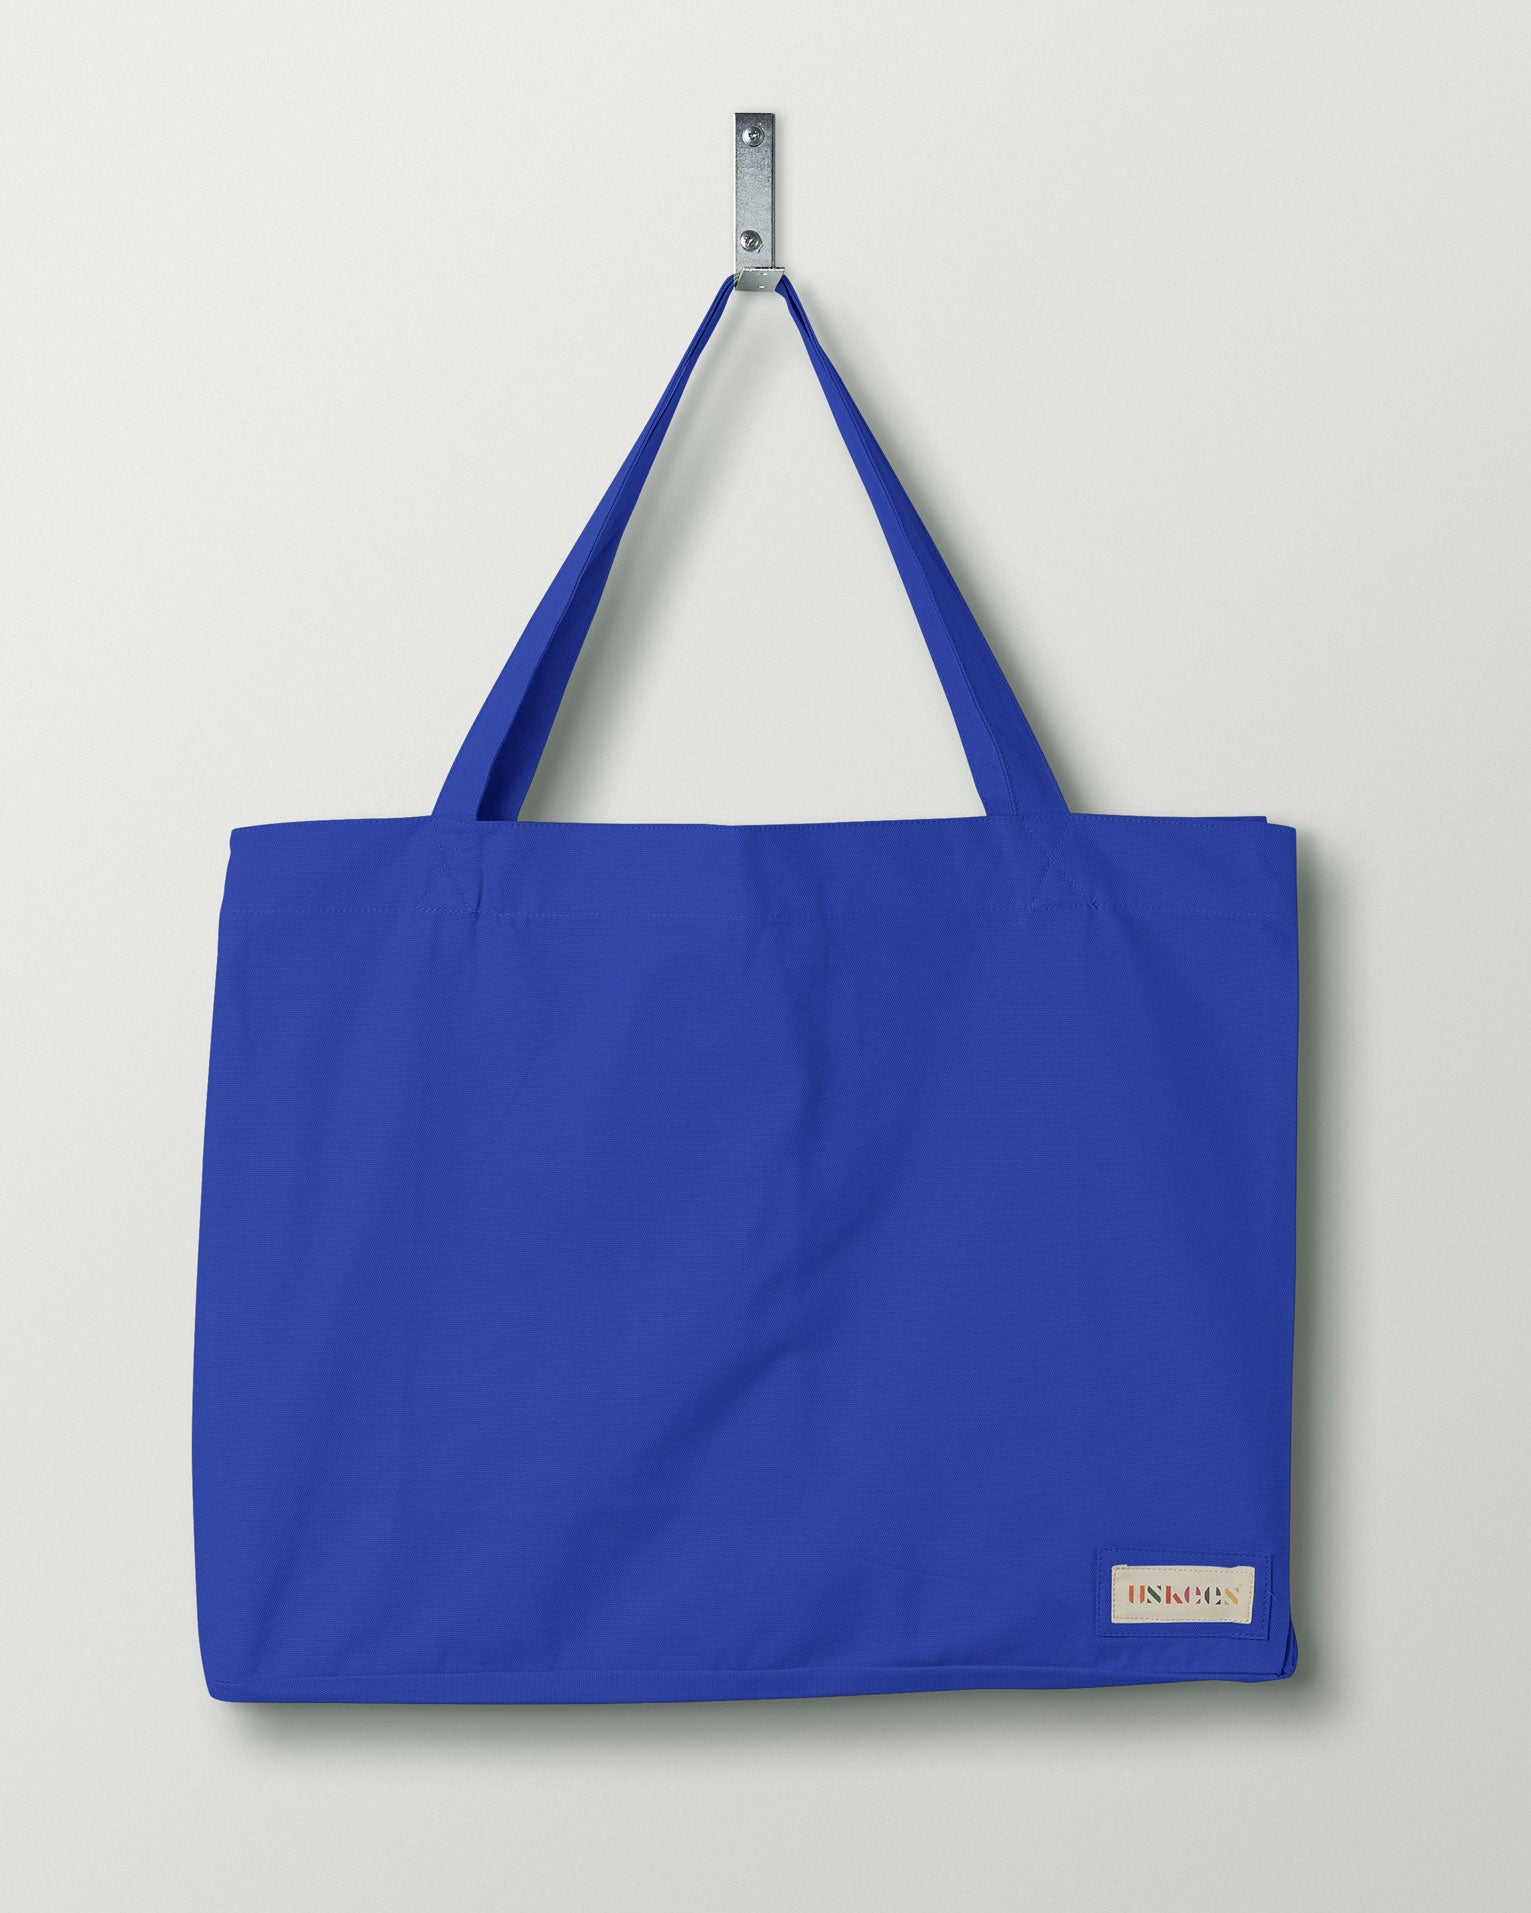 Full front hanging shot of Uskees #4001 large ultra-blue tote bag, showing double handles and Uskees woven logo.